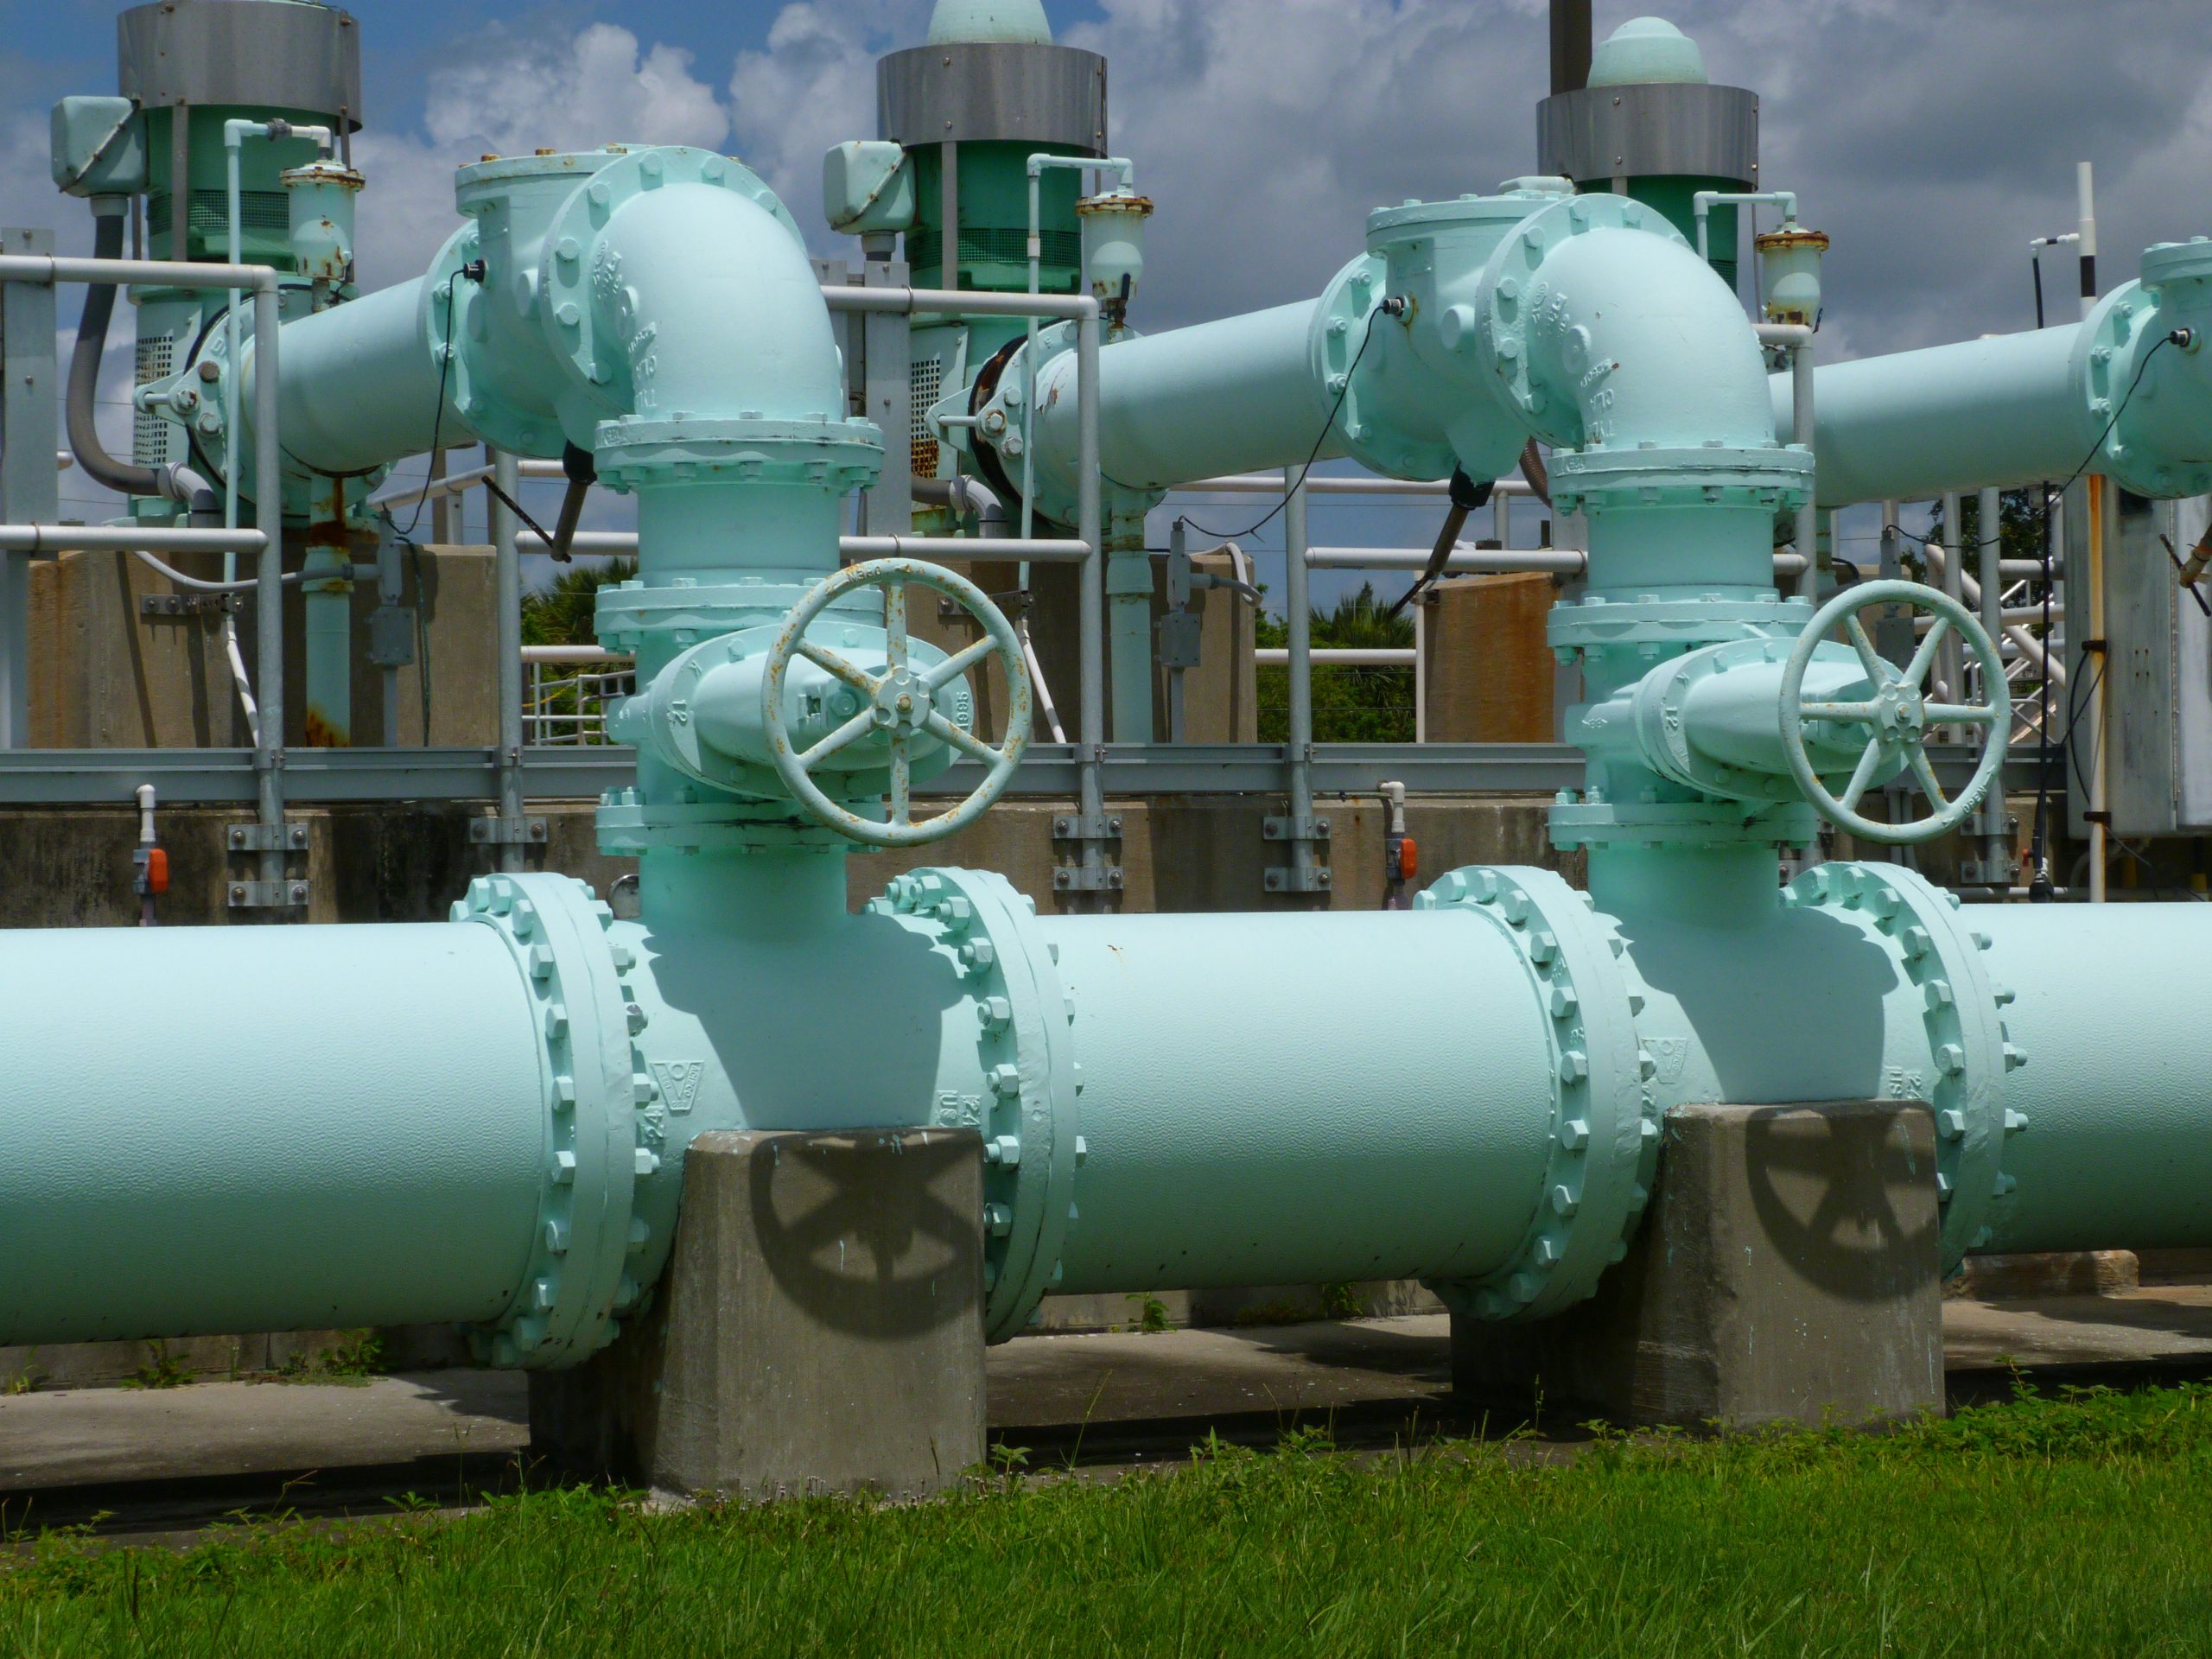 A network of gas pipes at a control station.